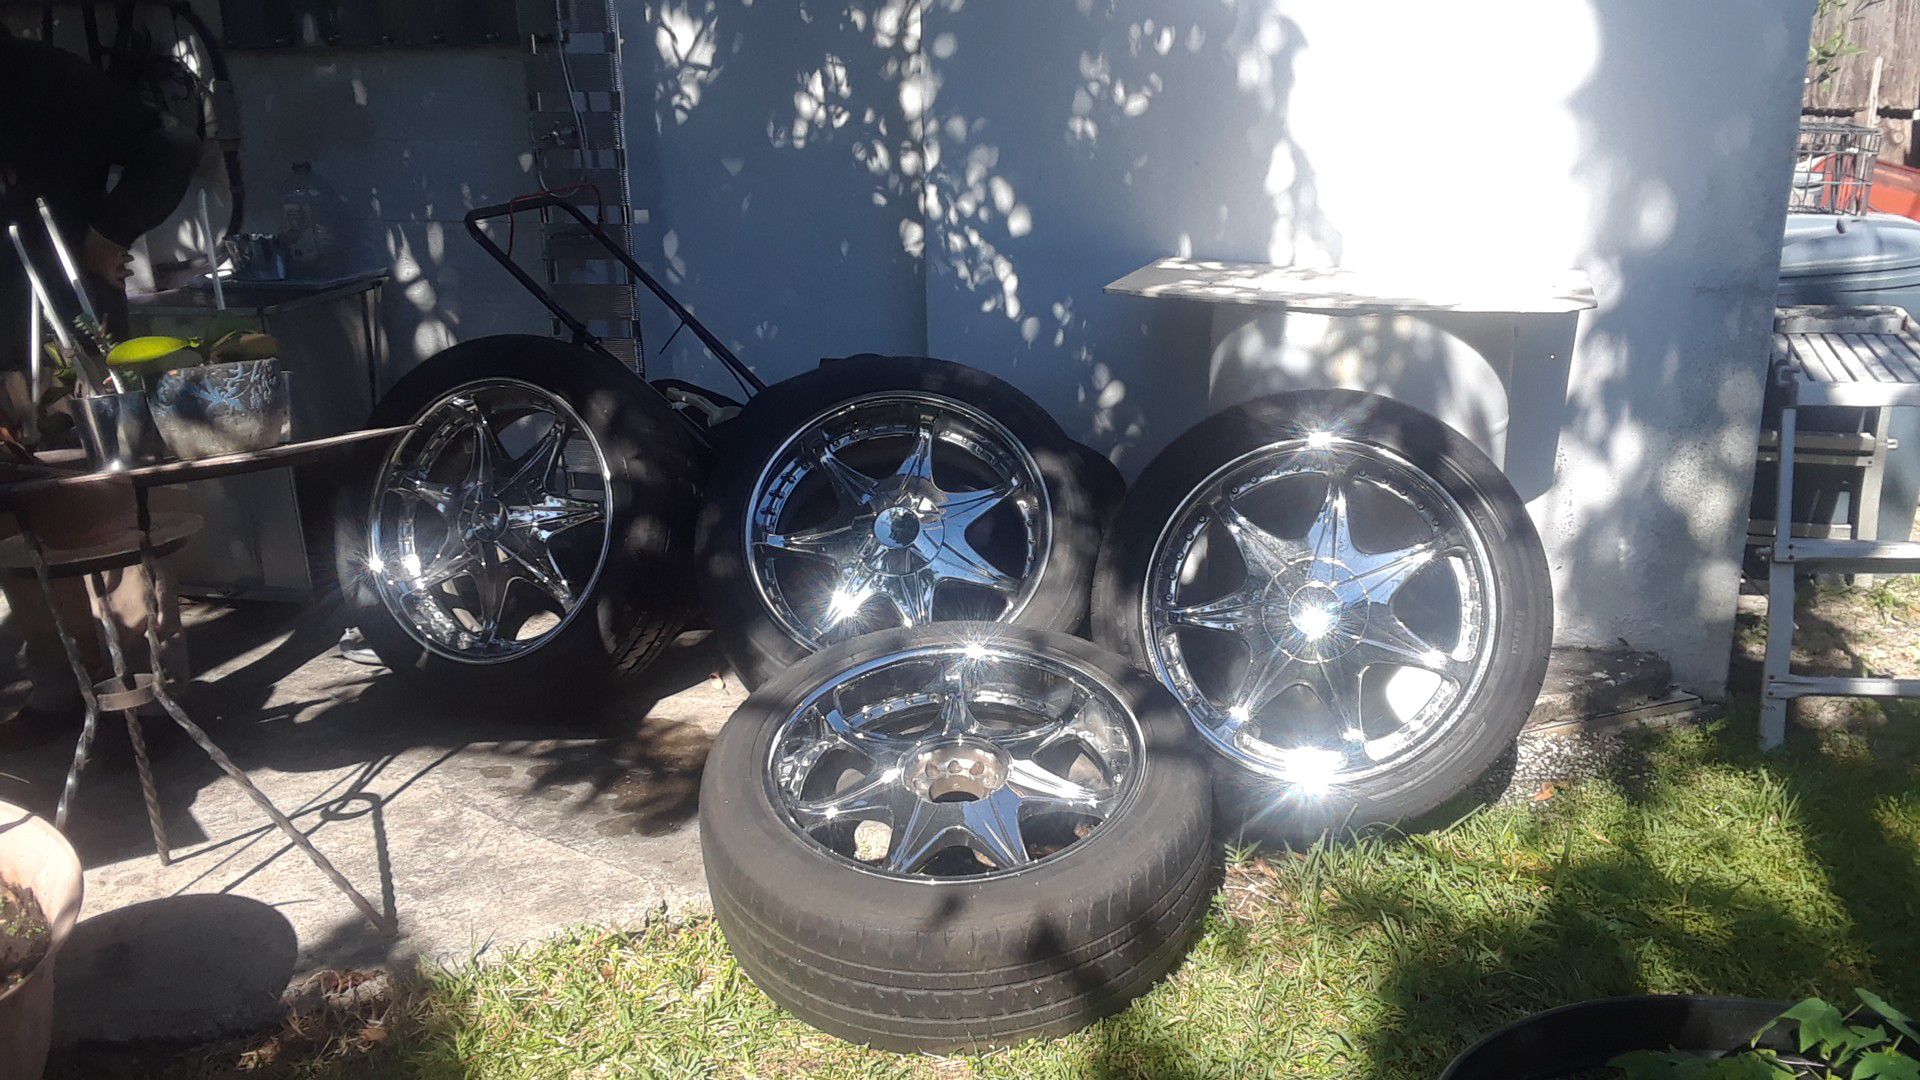 4 rims and tires 22 inches aluminium 3tires in a good shape one not one cup is missing